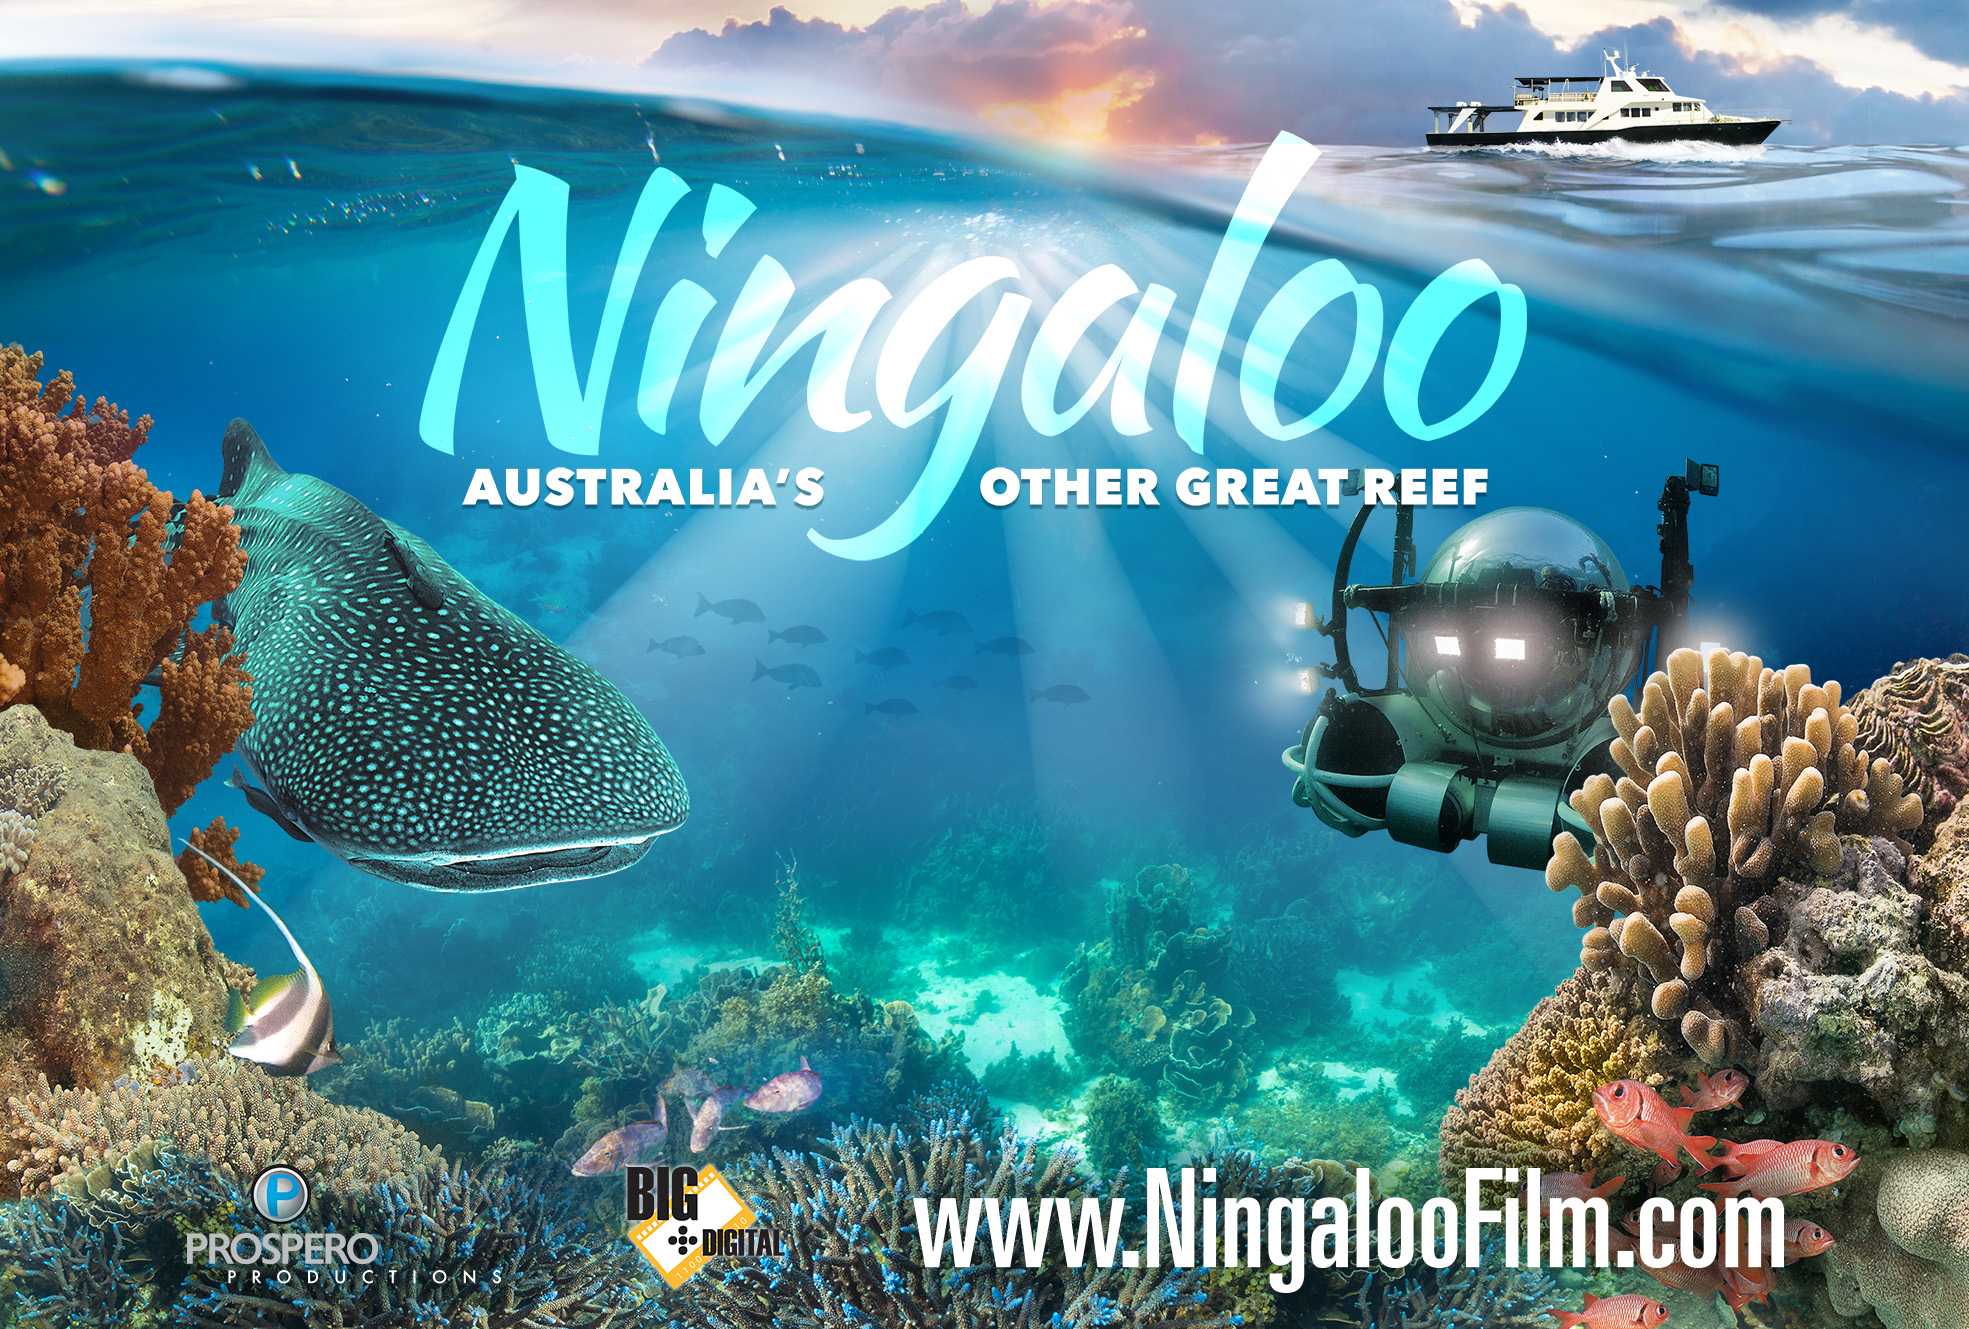 A poster for the documentary Ningaloo: Australia's Other Great Reef